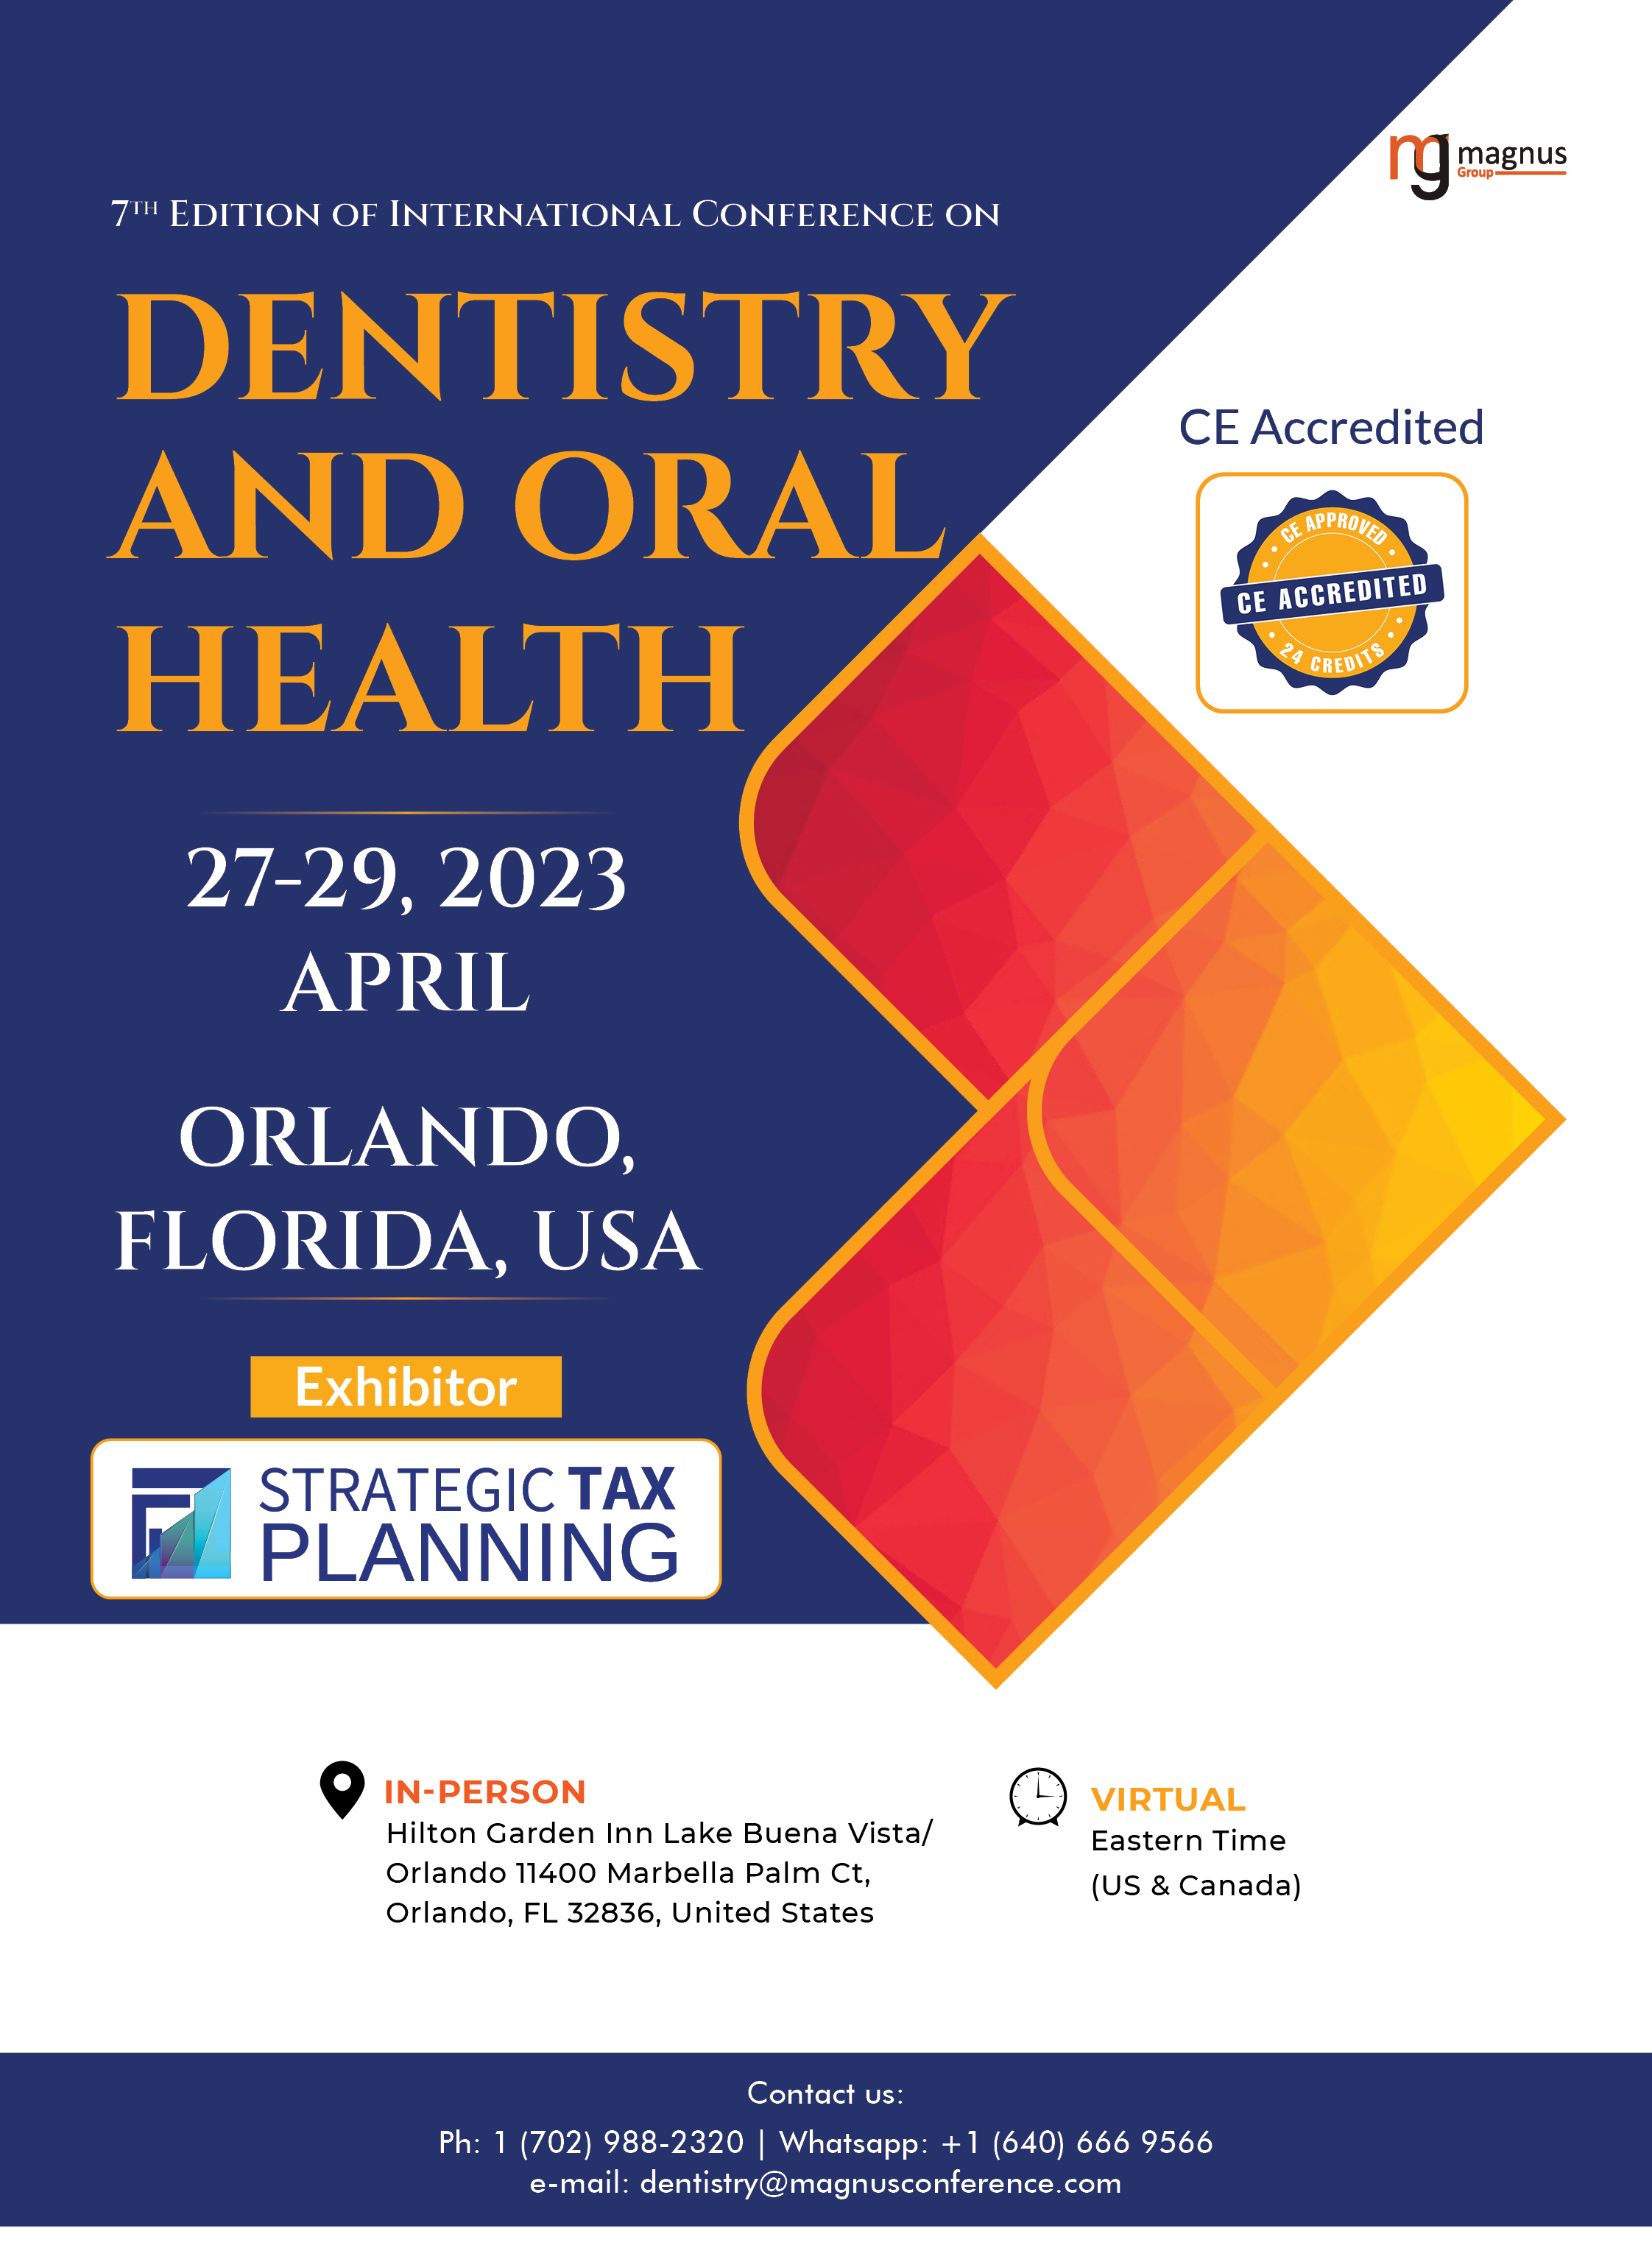 7th Edition of International Conference on Dentistry and Oral Health | Orlando, USA Program